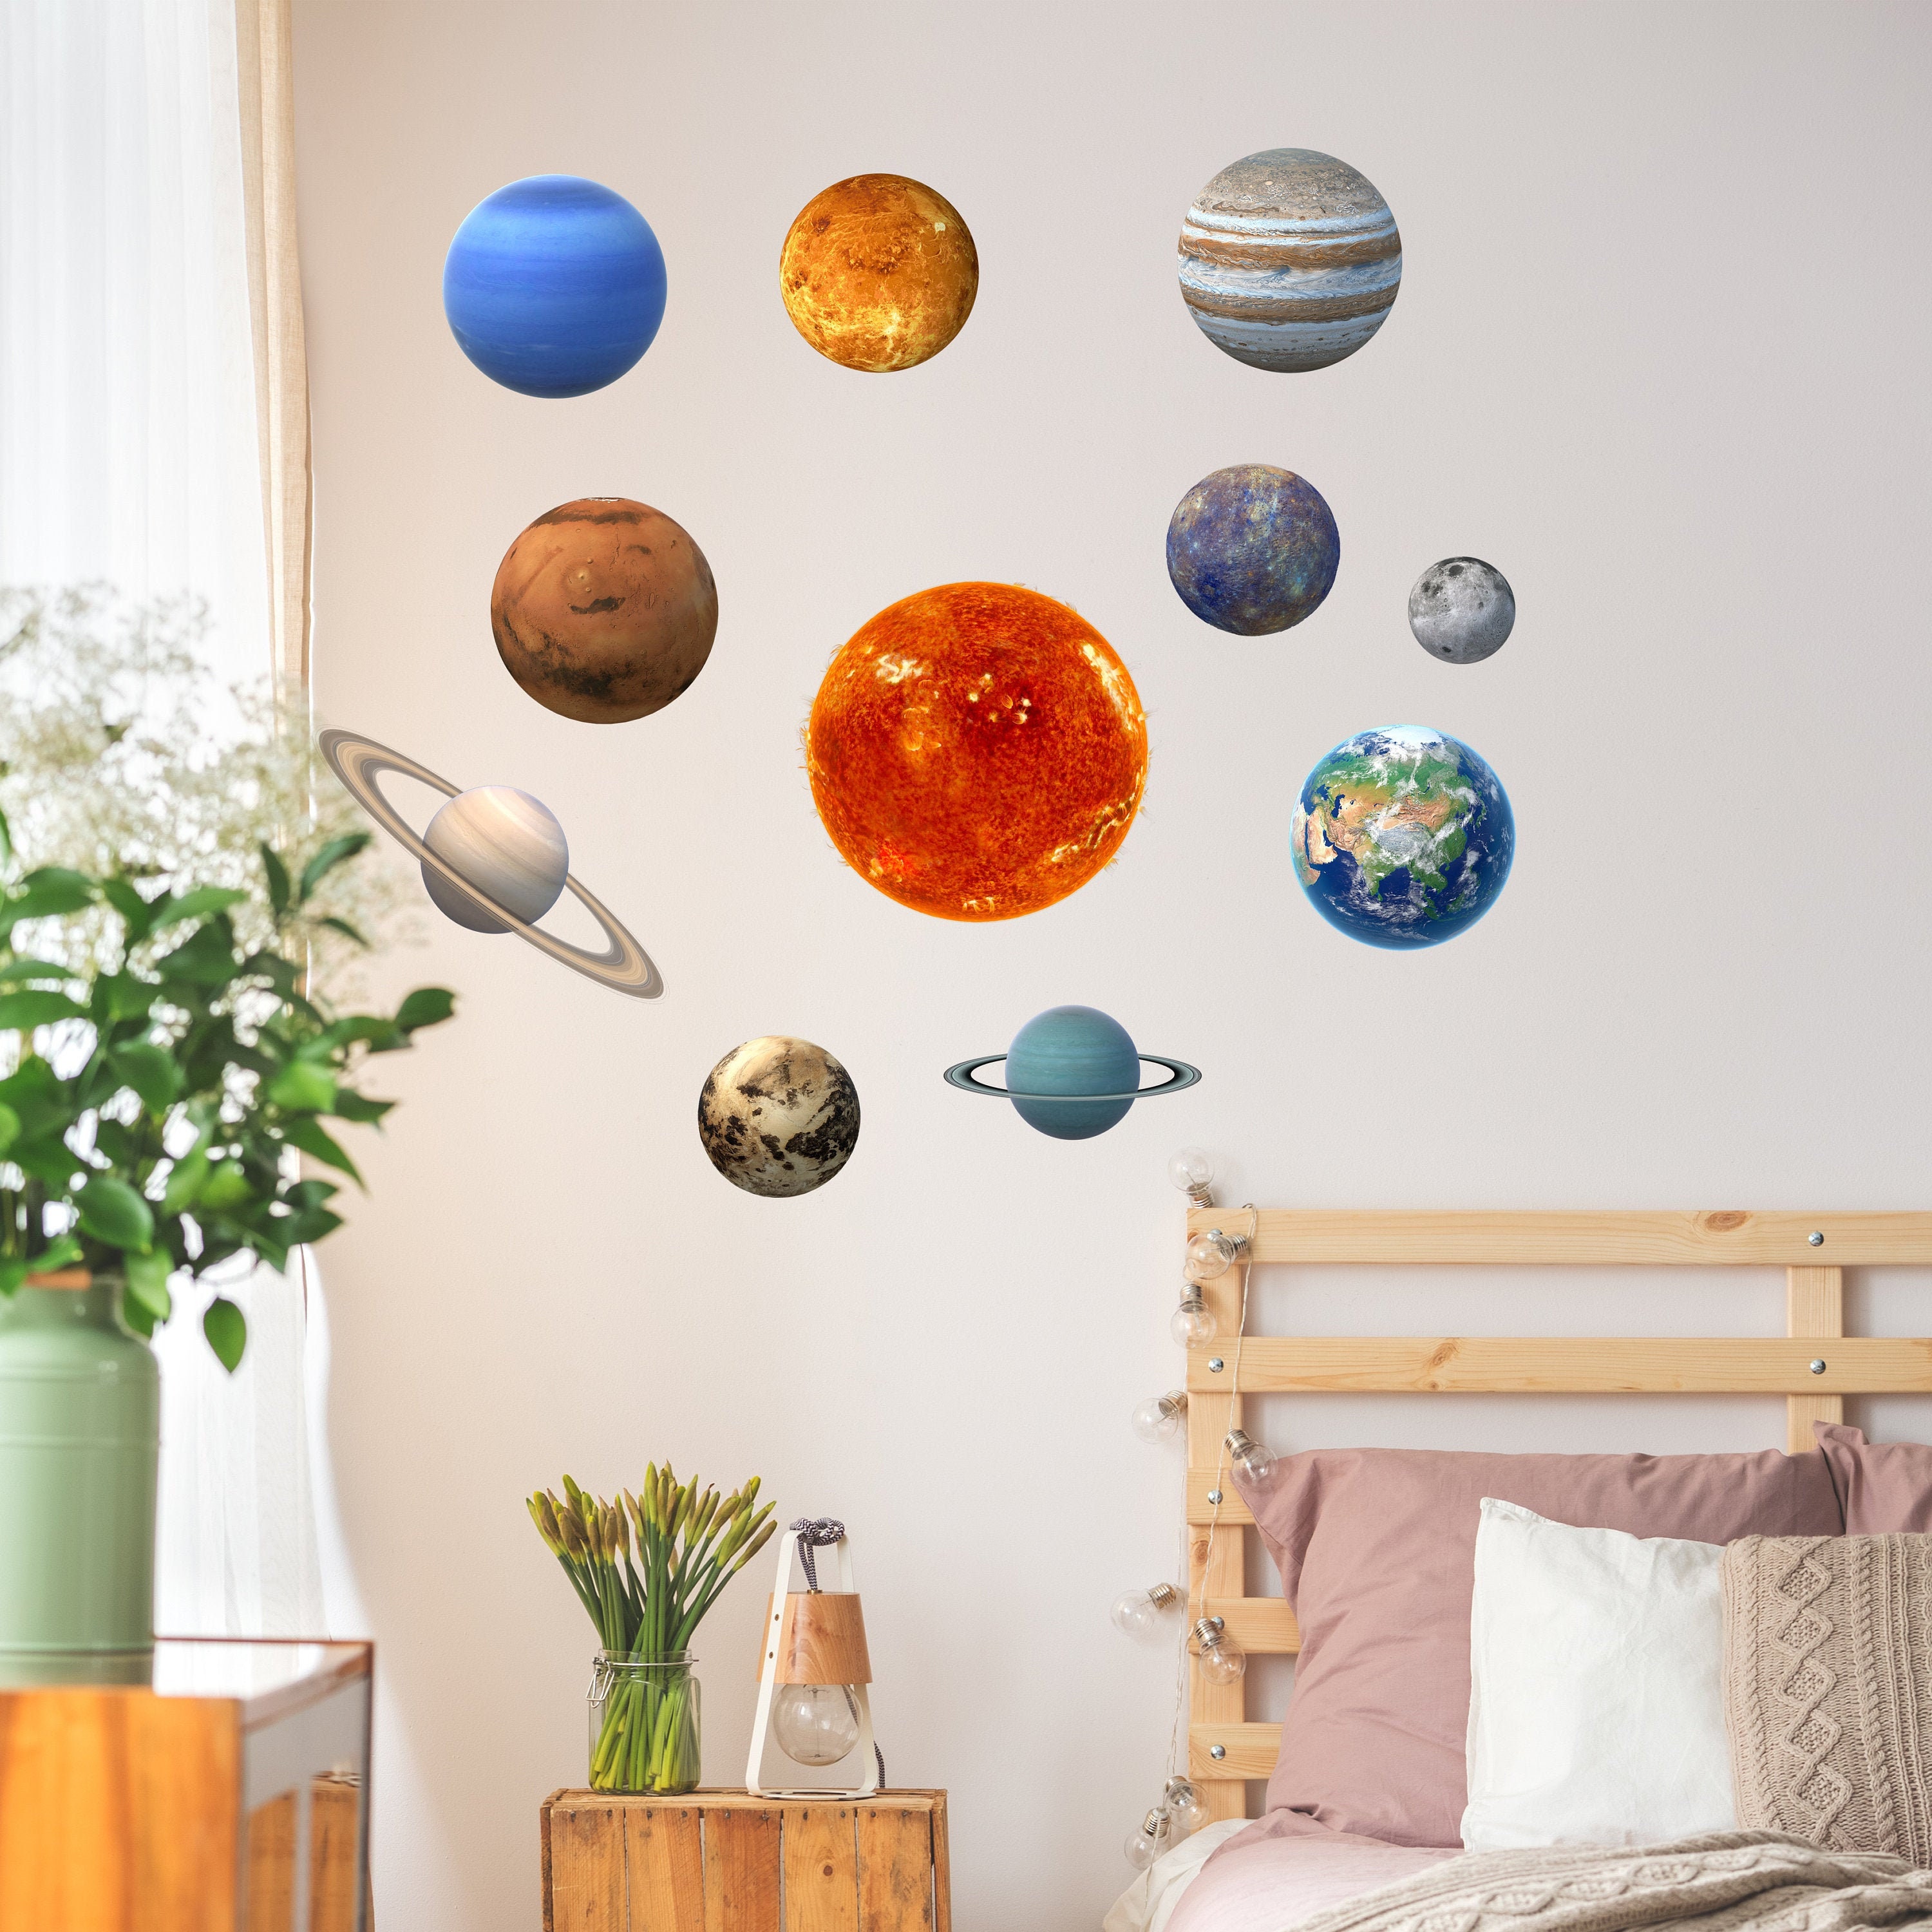 Glow in The Darl Planets Wall Stickers Kids Bedroom Decor Lumonous